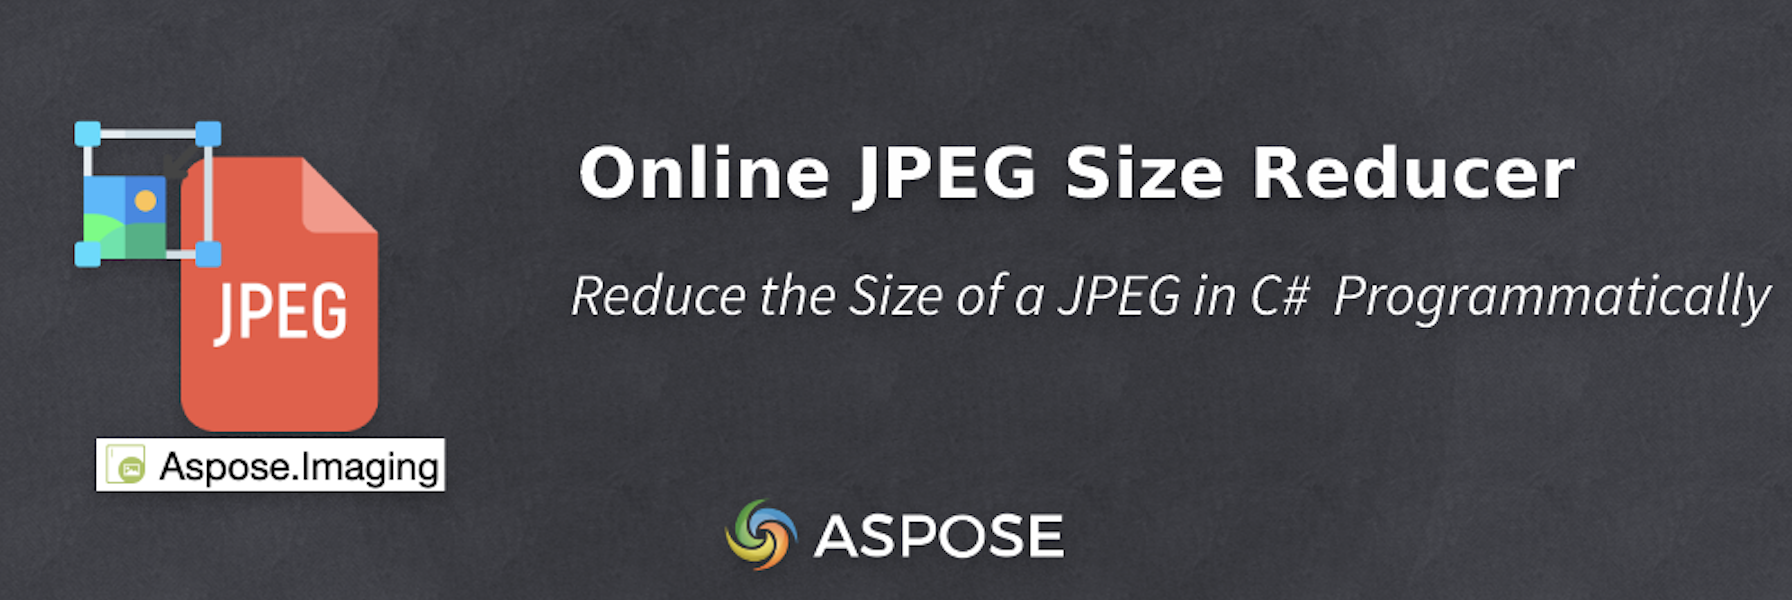 Reduce the Size of a JPEG in C# - Online JPEG Size Reducer